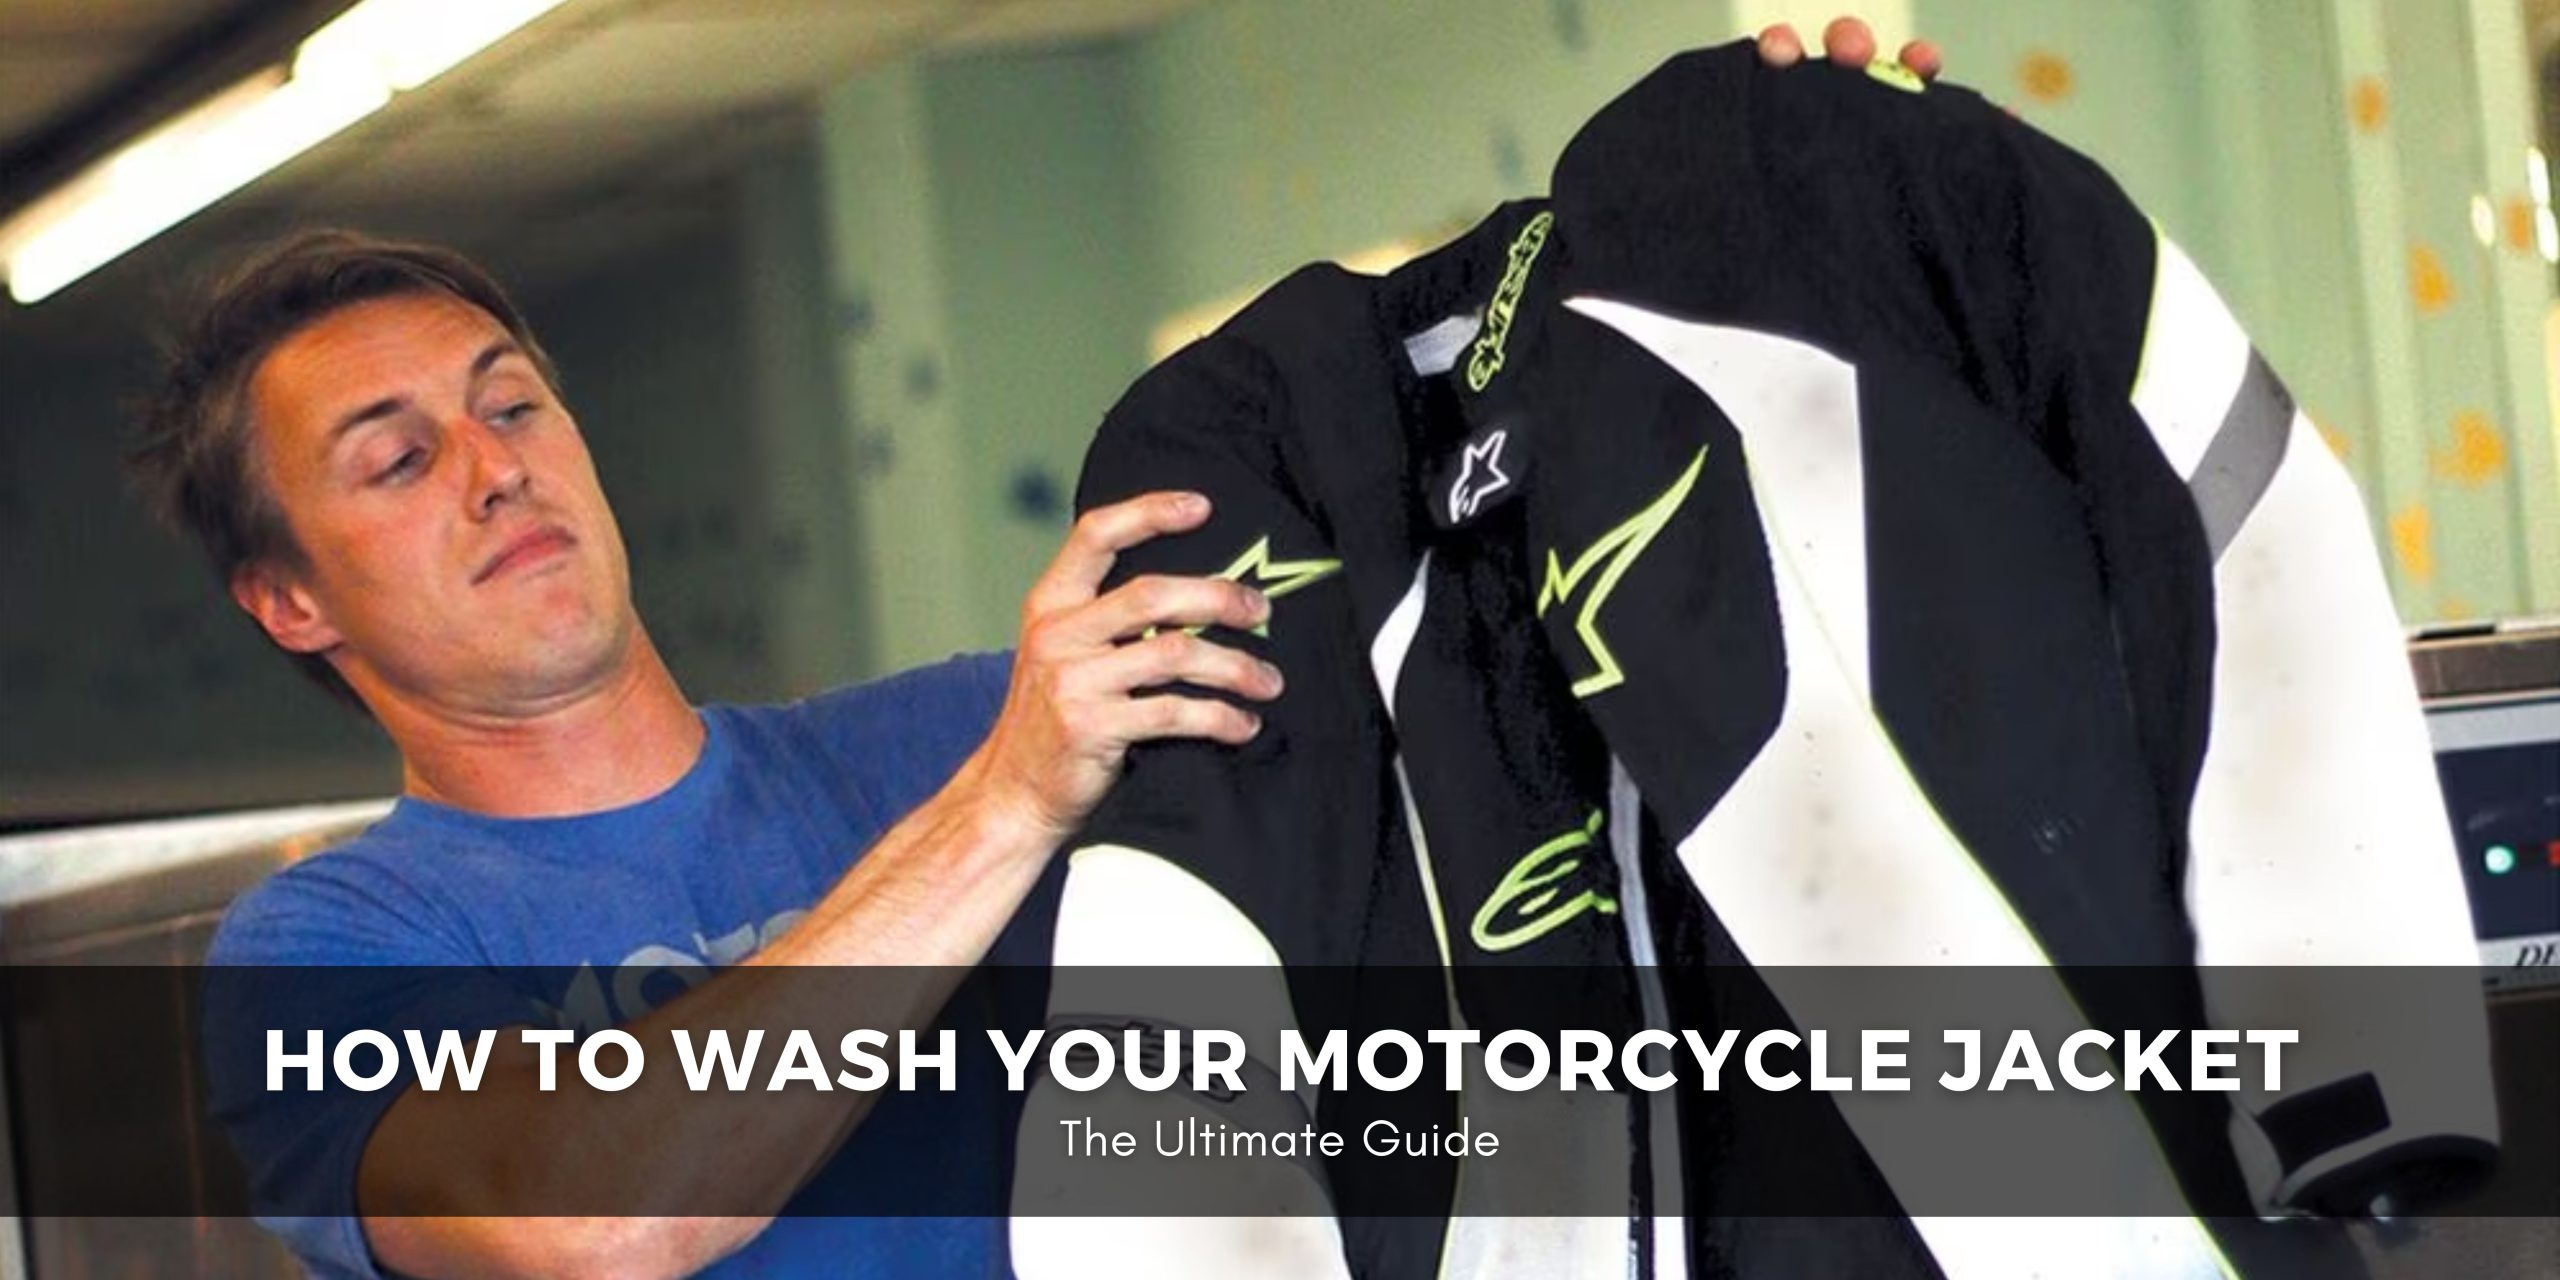 How to Wash Your Motorcycle Jacket